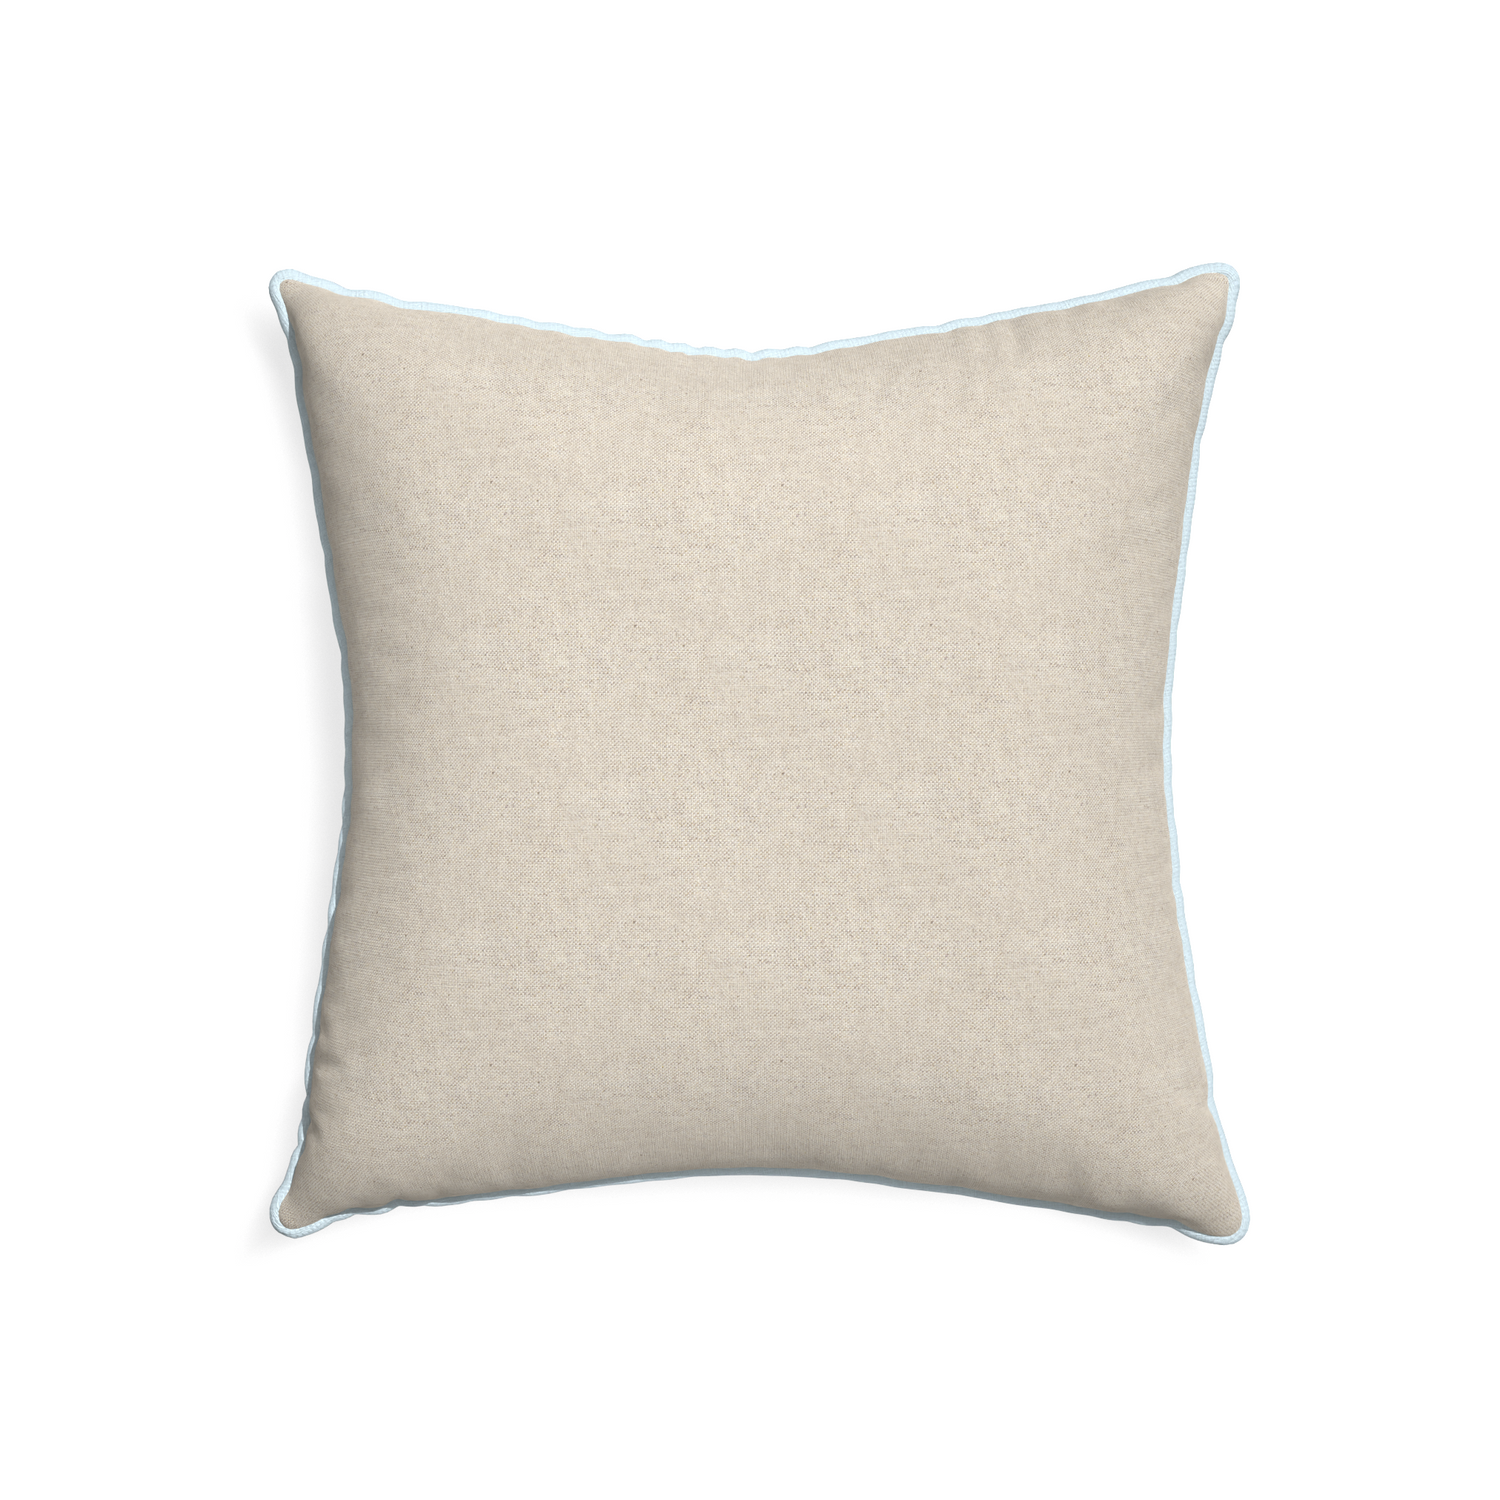 22-square oat custom light brownpillow with powder piping on white background